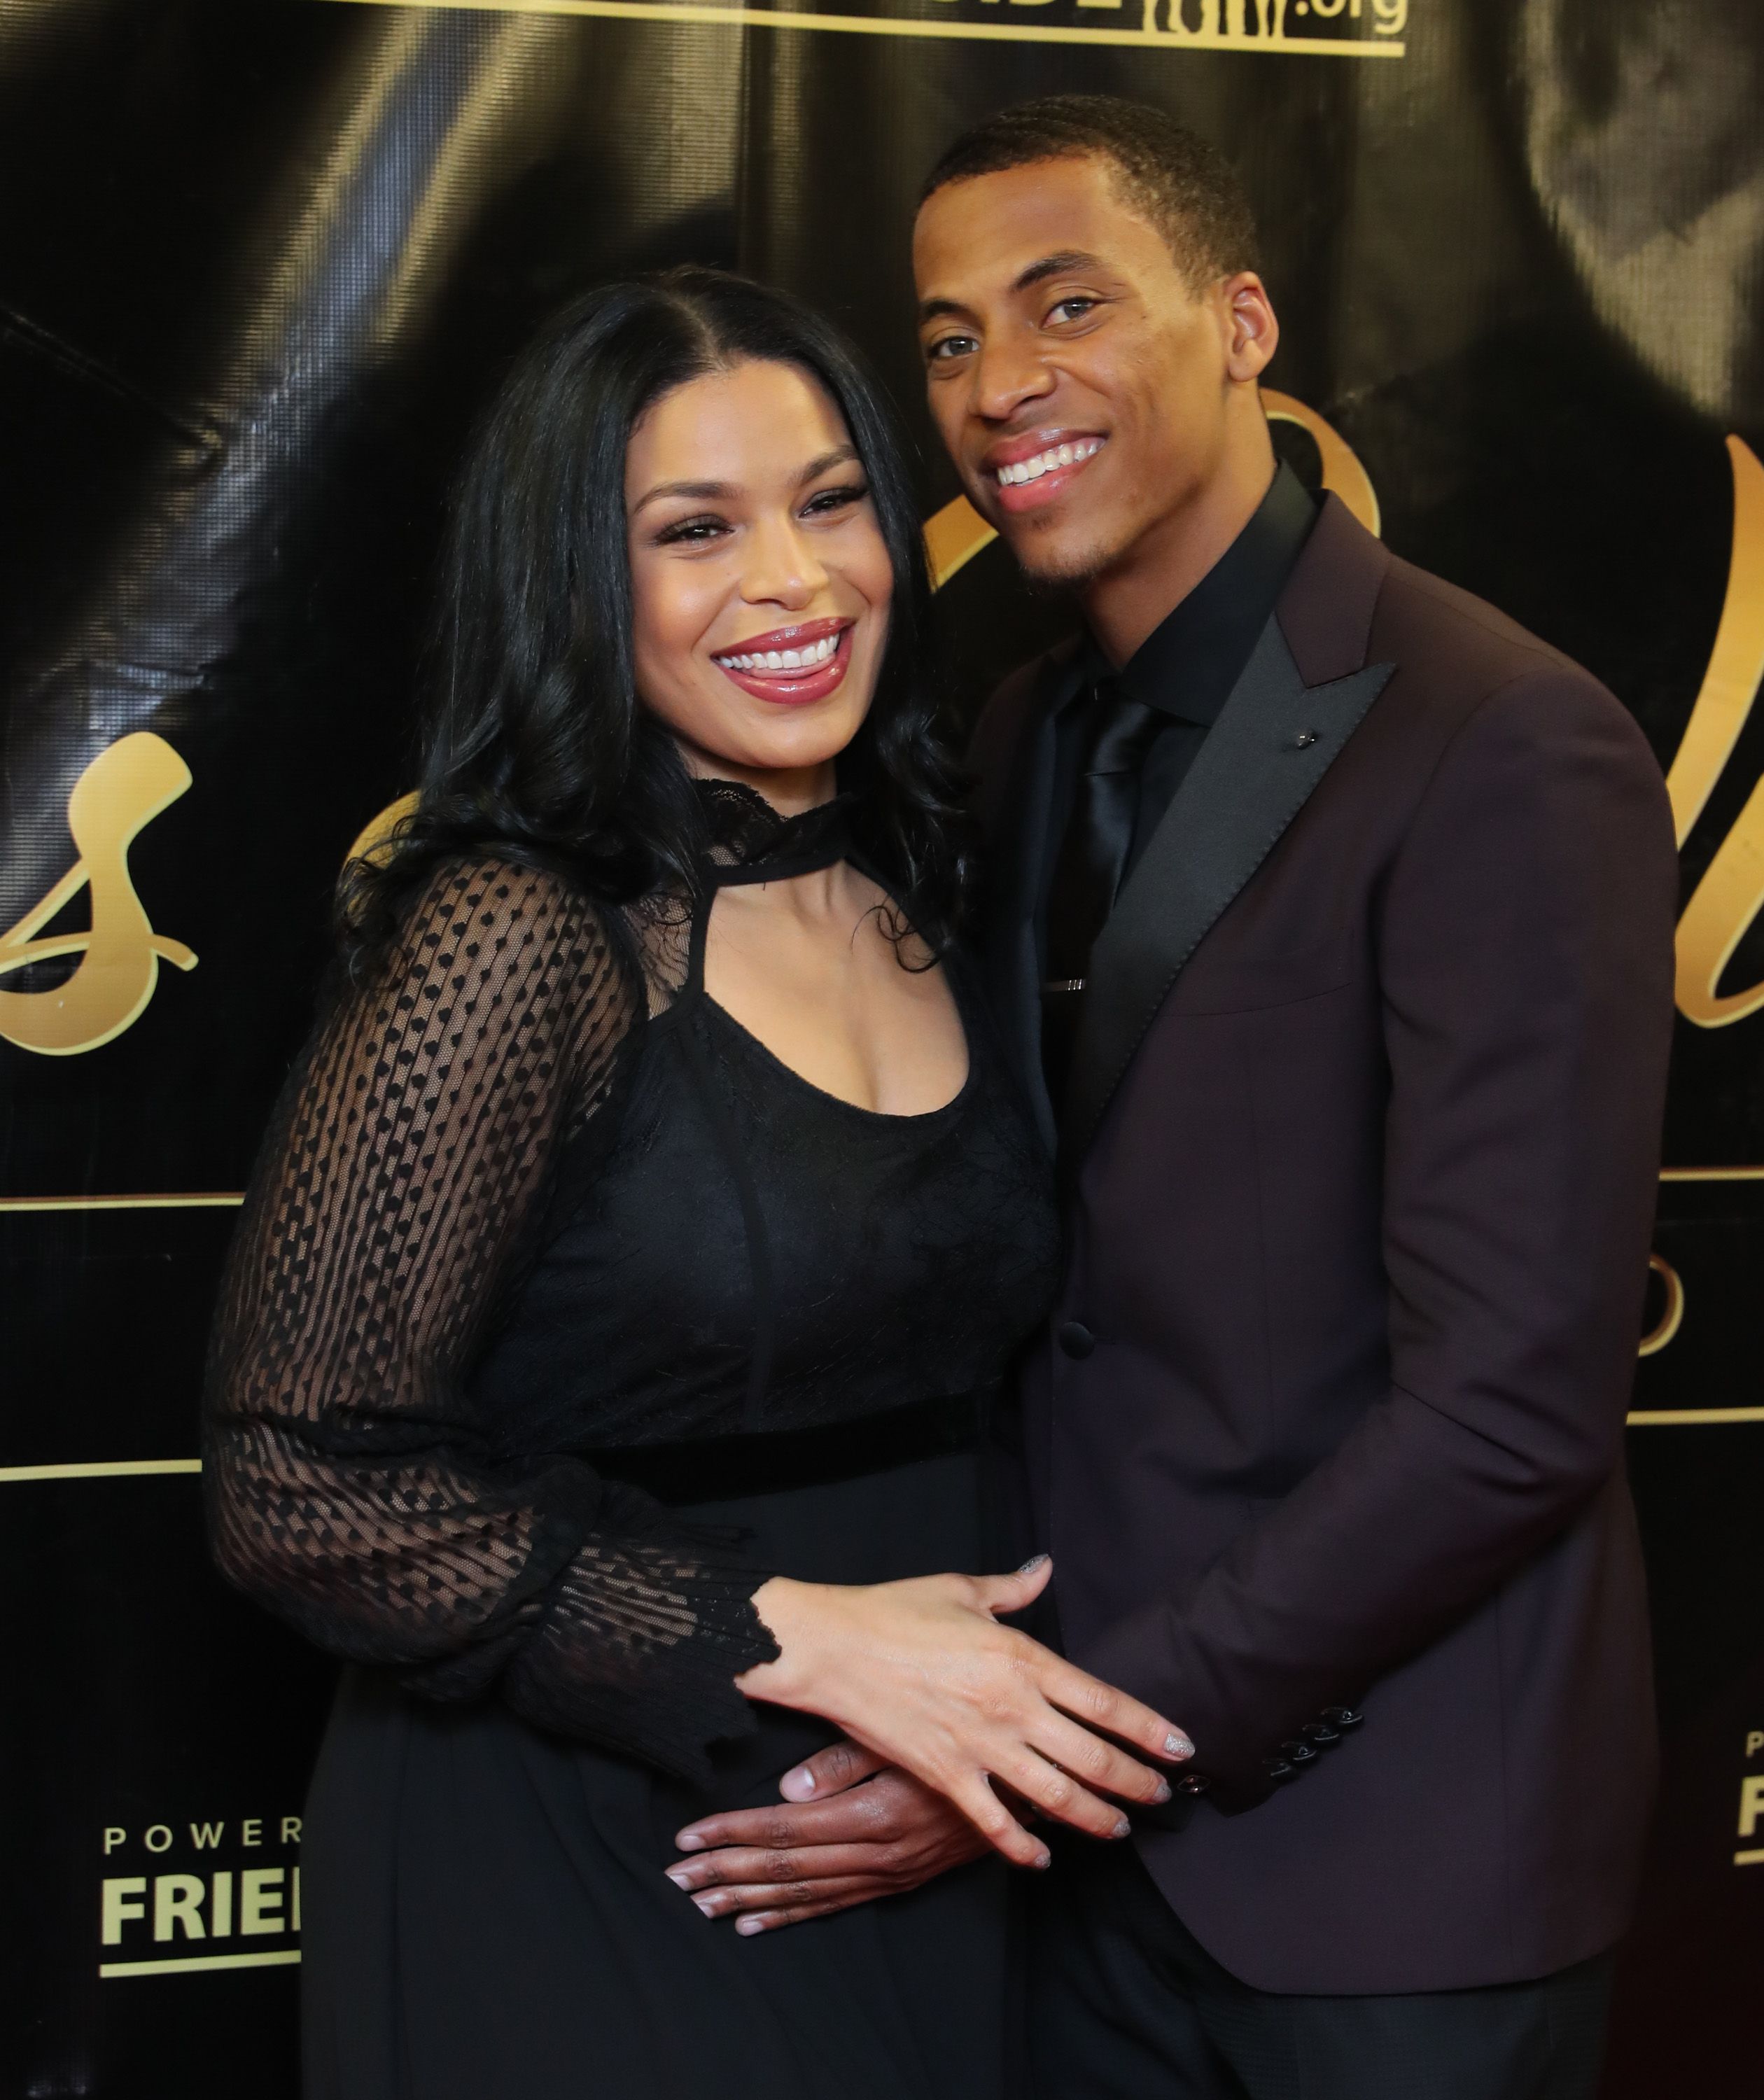 Jordin Sparks And Husband Dana Isaiah at the 2017 One Night With The Stars Benefit at The Theater at Madison Square Garden on December 4, 2017 | Photo: Getty Images